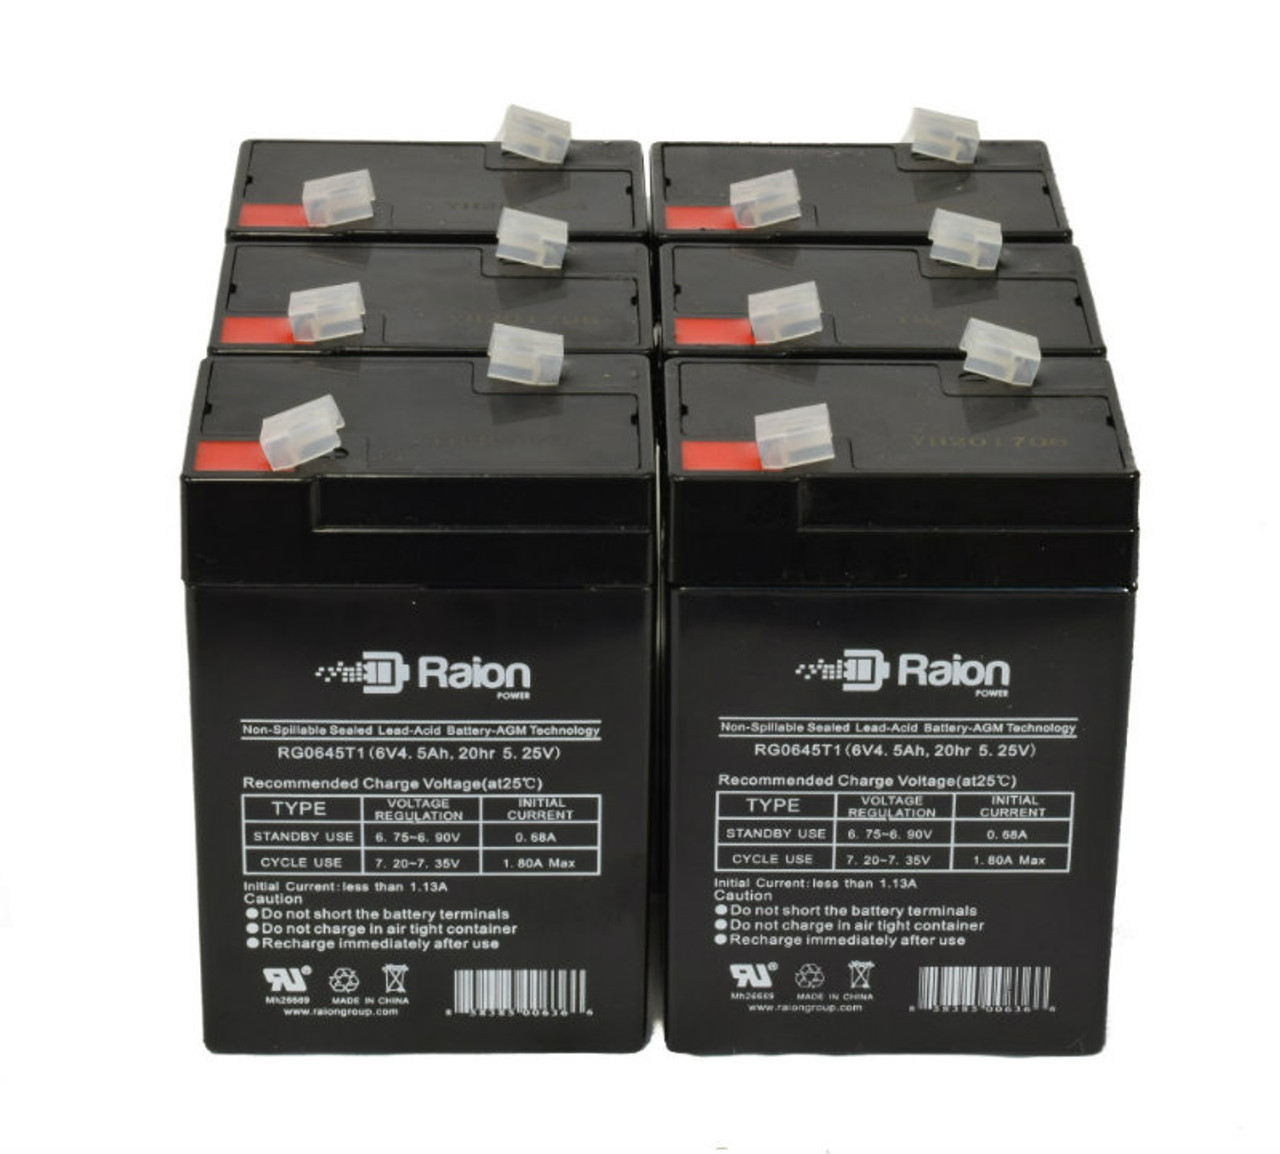 Raion Power 6 Volt 4.5Ah RG0645T1 Replacement Battery for Neptune NT645 - 6 Pack